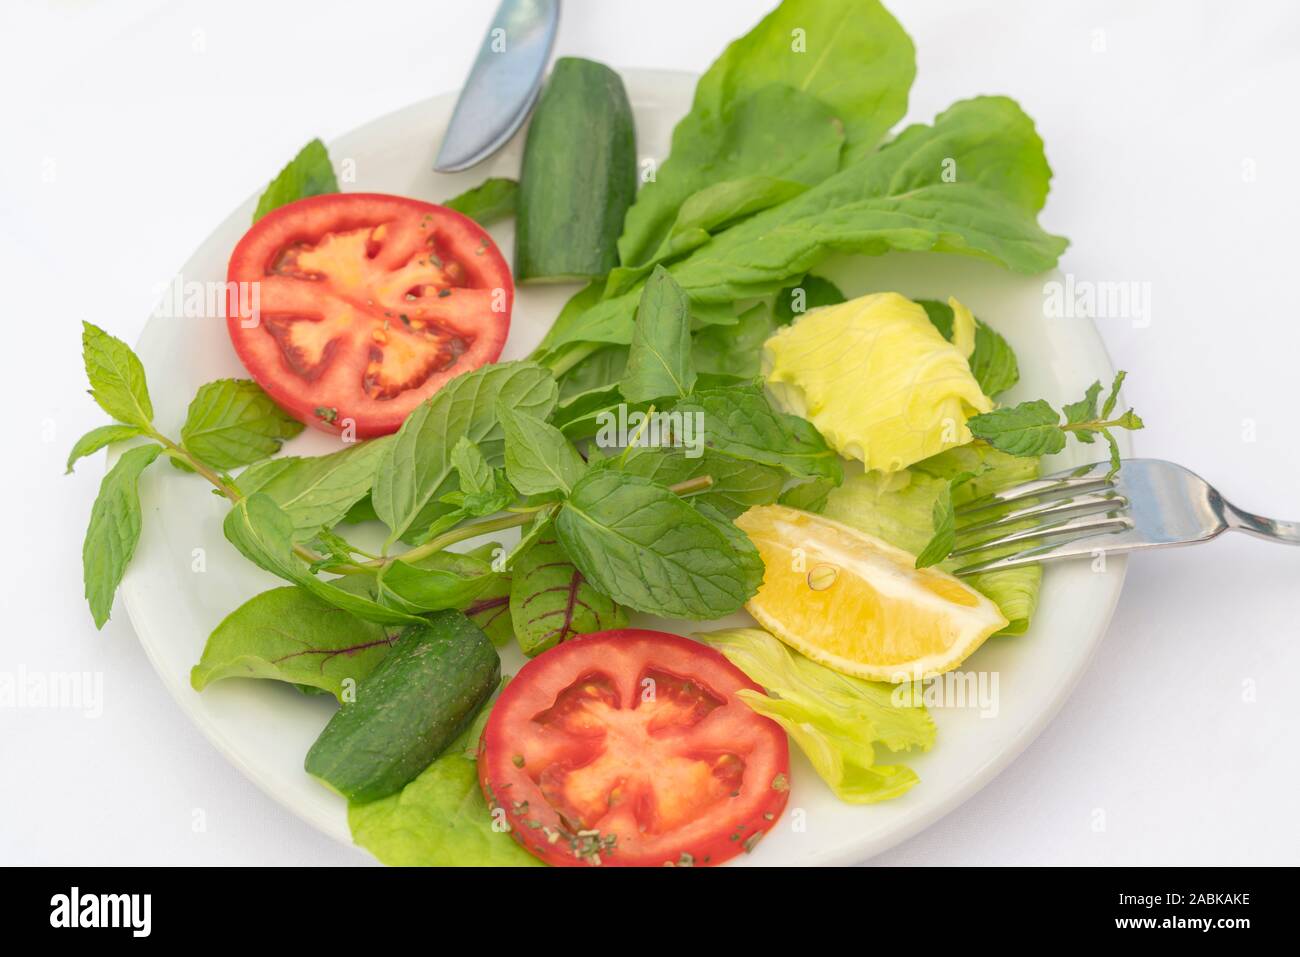 Salading from spinach, mint, mangold, greens, lemon, tomato and cucumber slices on the white plate with knife and fork on white background. Stock Photo